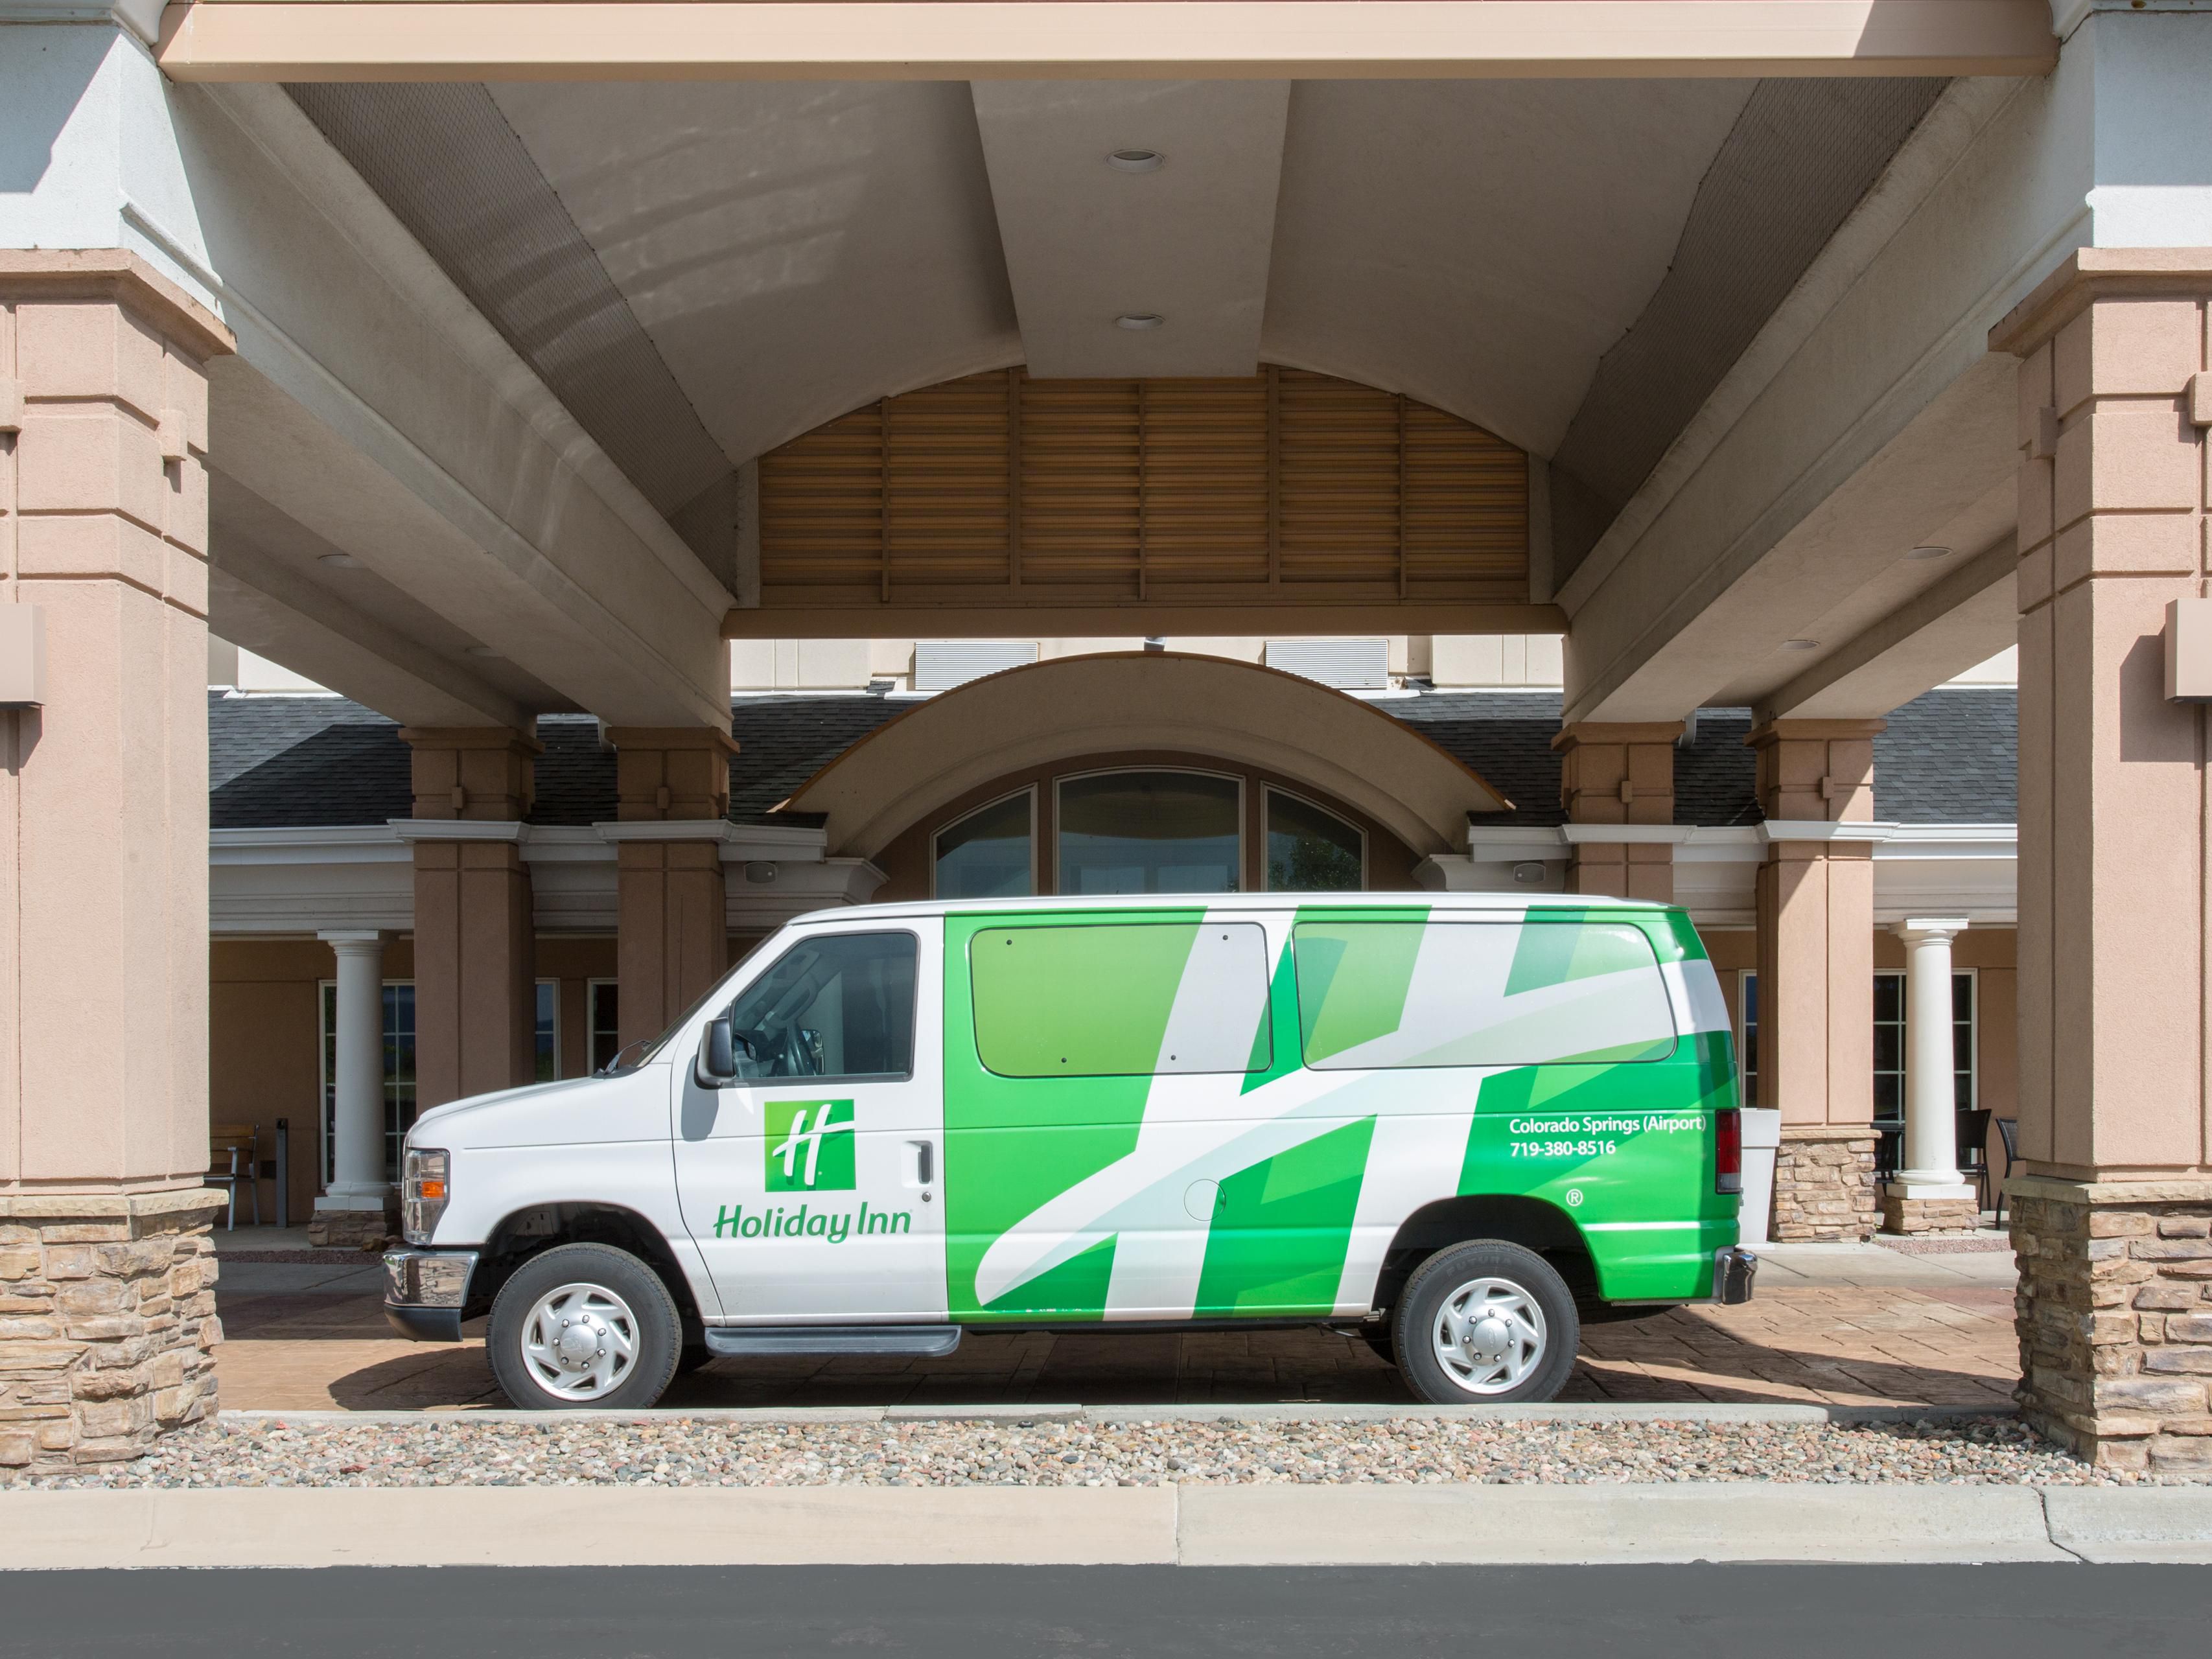 Our free airport shuttle runs Monday through Friday, 9:00am to 11:00pm. We recommend calling the hotel prior to booking your trip to confirm shuttle availability. 